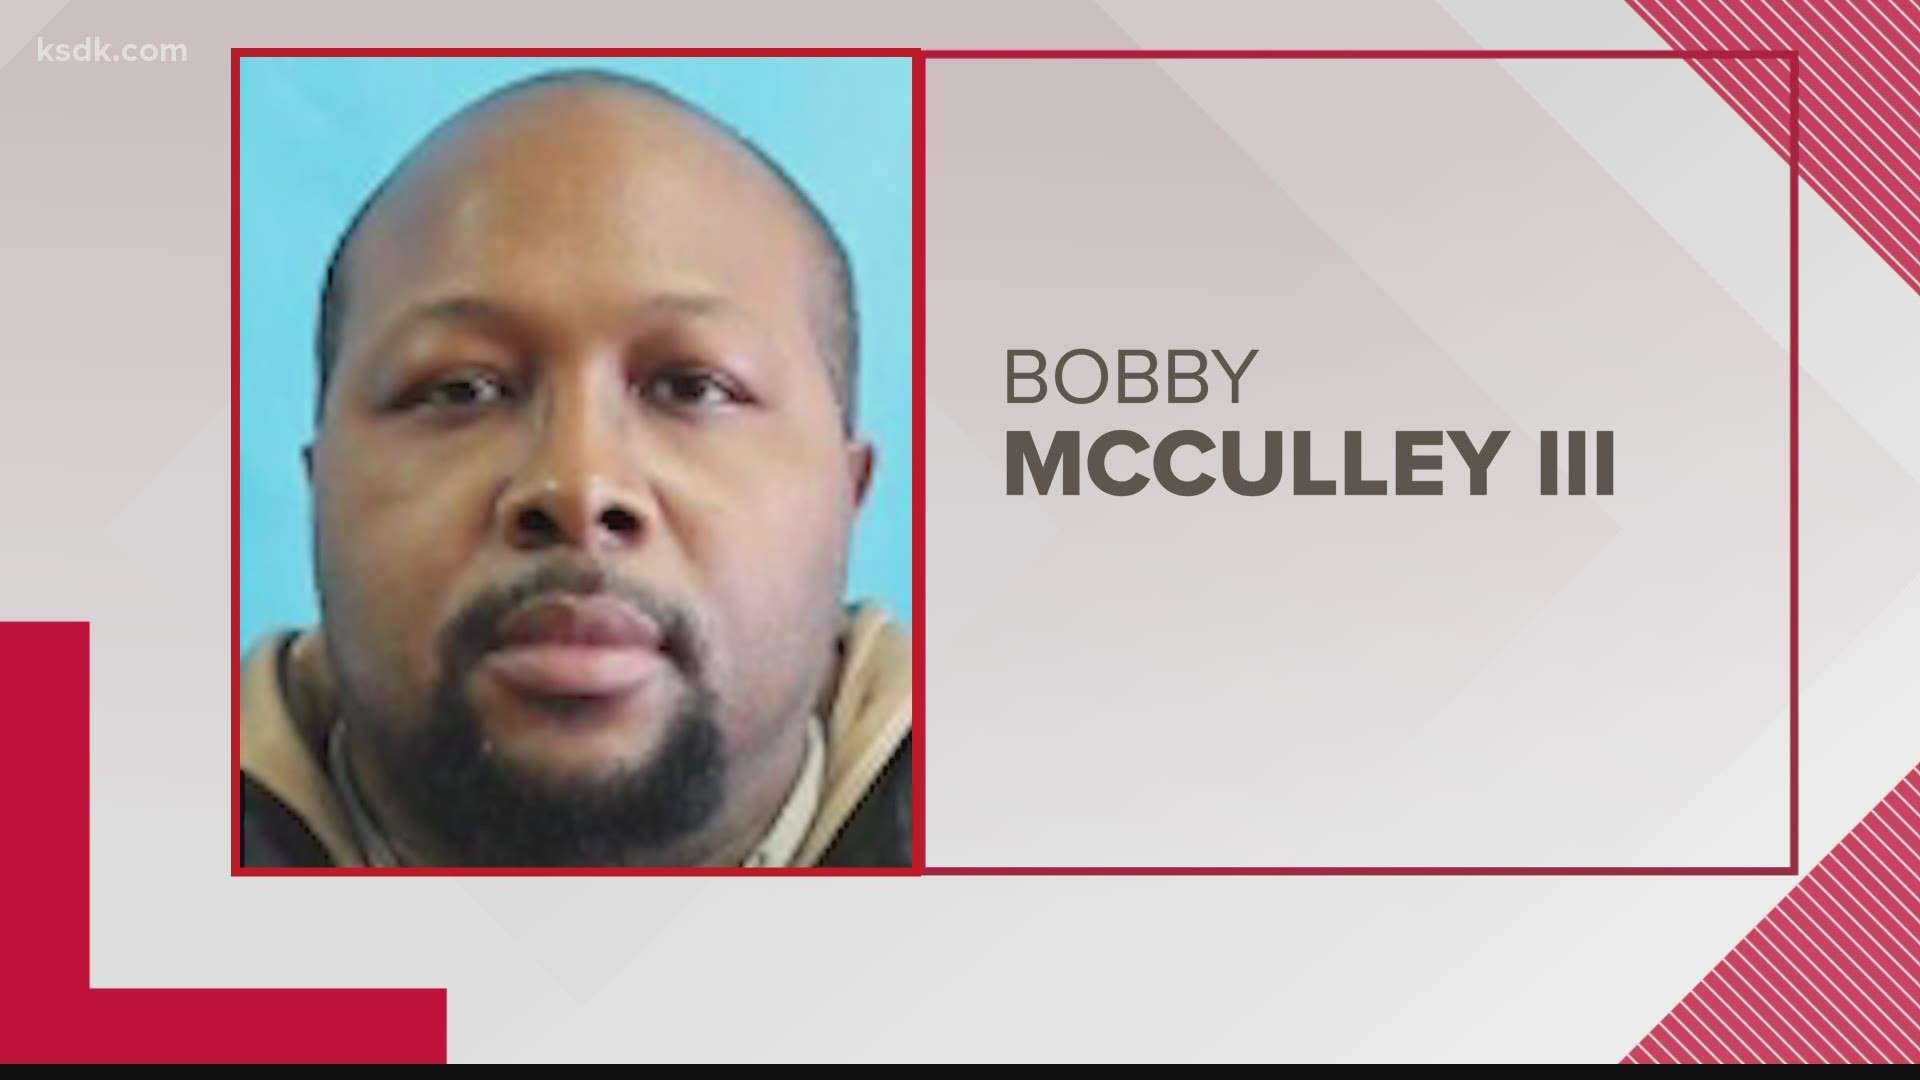 The girl was taken from the scene of a triple homicide by her father, Bobby McCulley III, according to the Amber Alert from the St. Louis County Police Department.